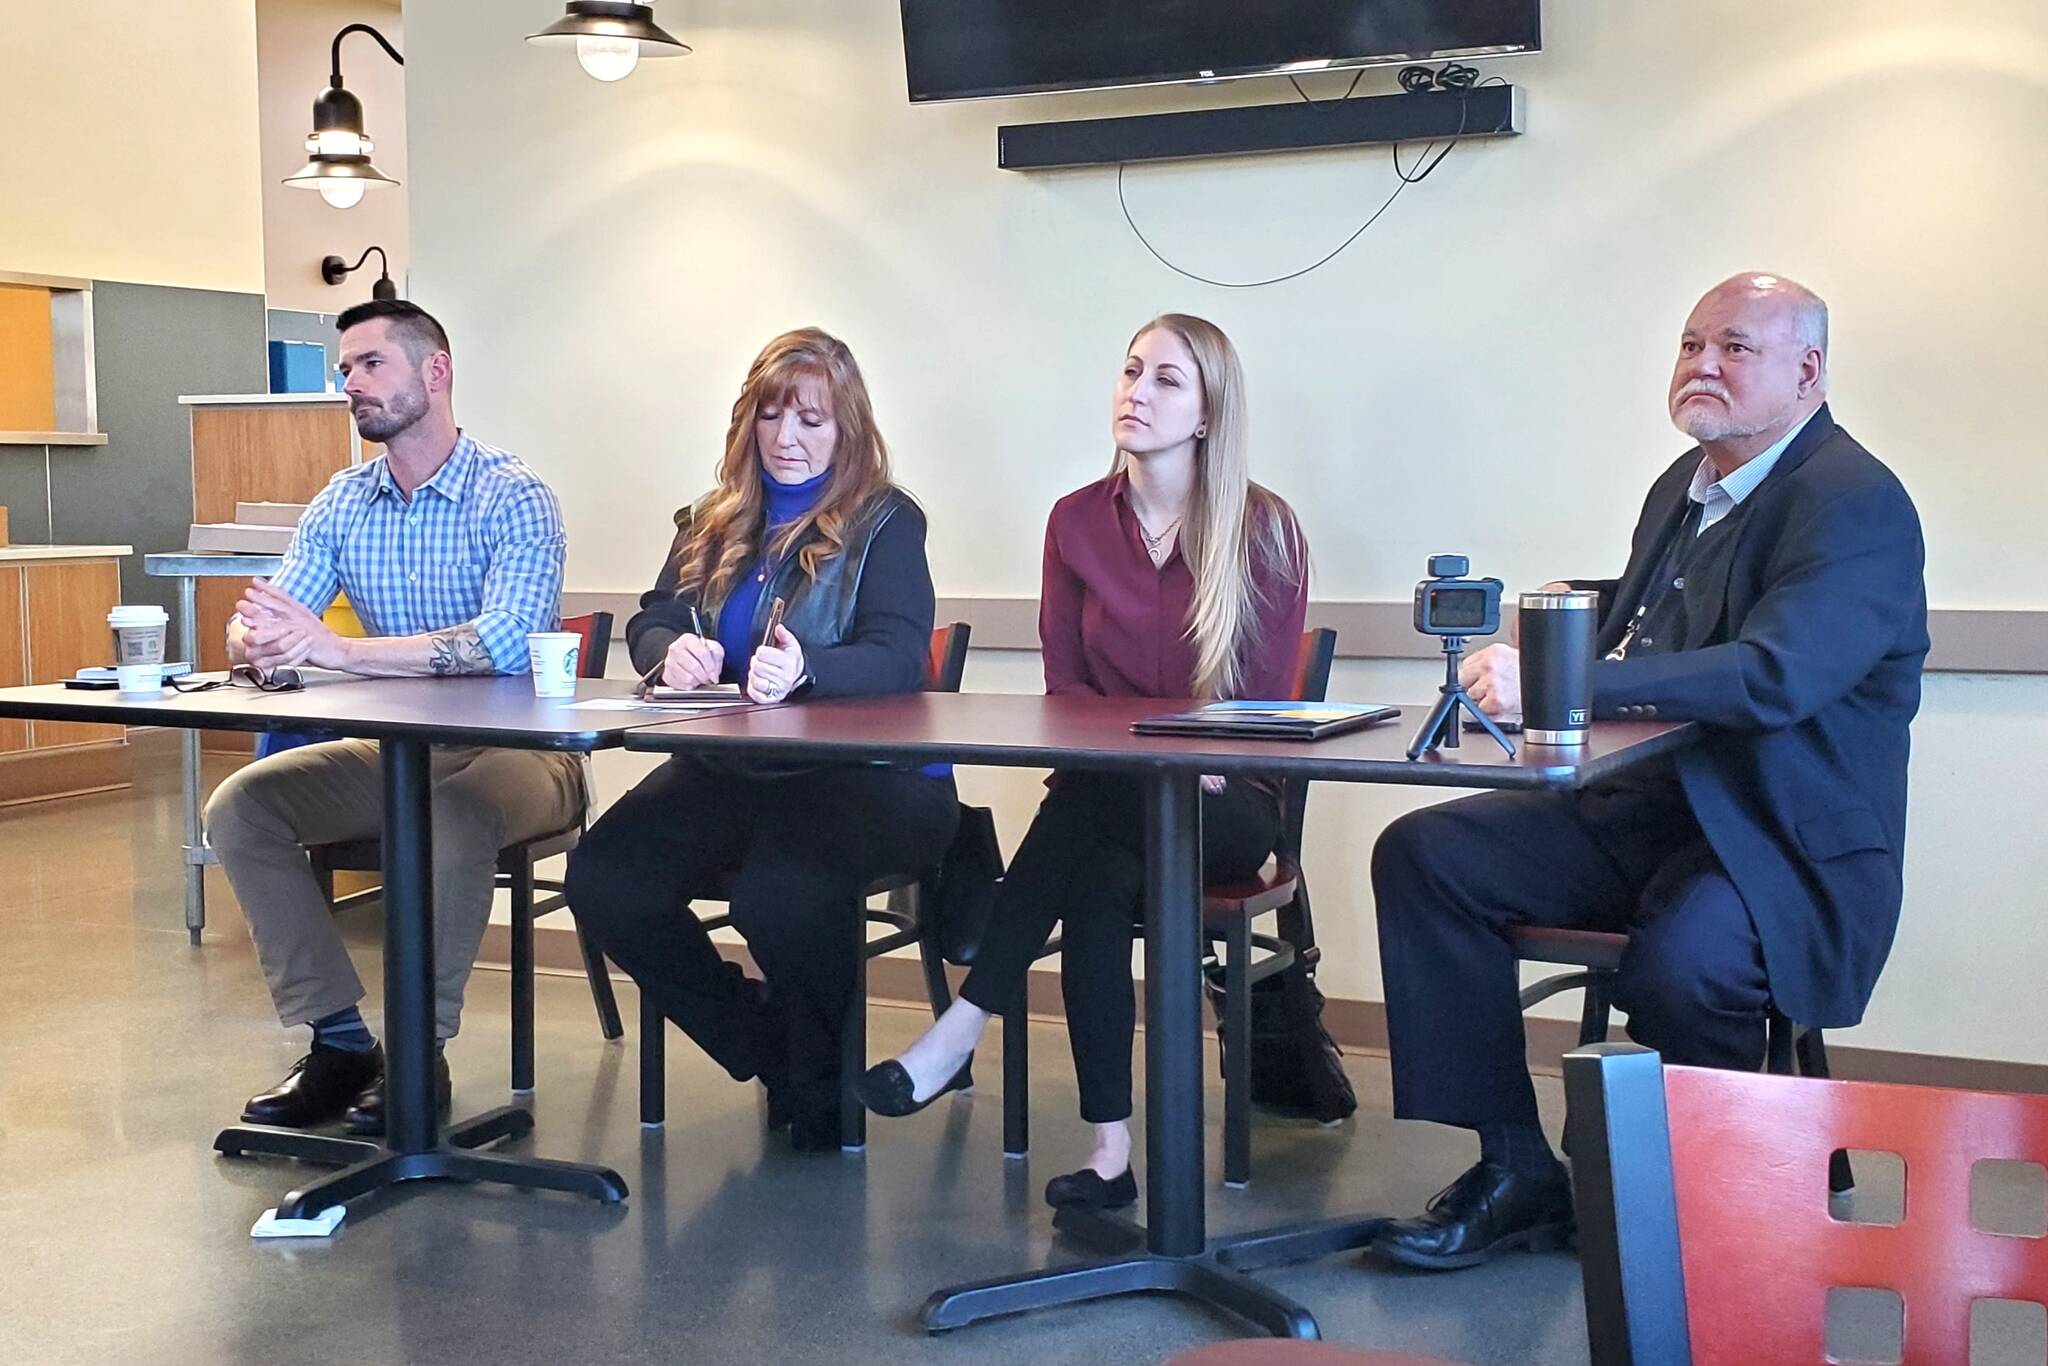 Scott Stewart, Rose Baldridge, Vicki Brinigar and Dr. Richard Geiger were panelists at the Valley Cities fentanyl roundtable on Feb. 14. Photo by Keelin Everly-Lang / The Mirror